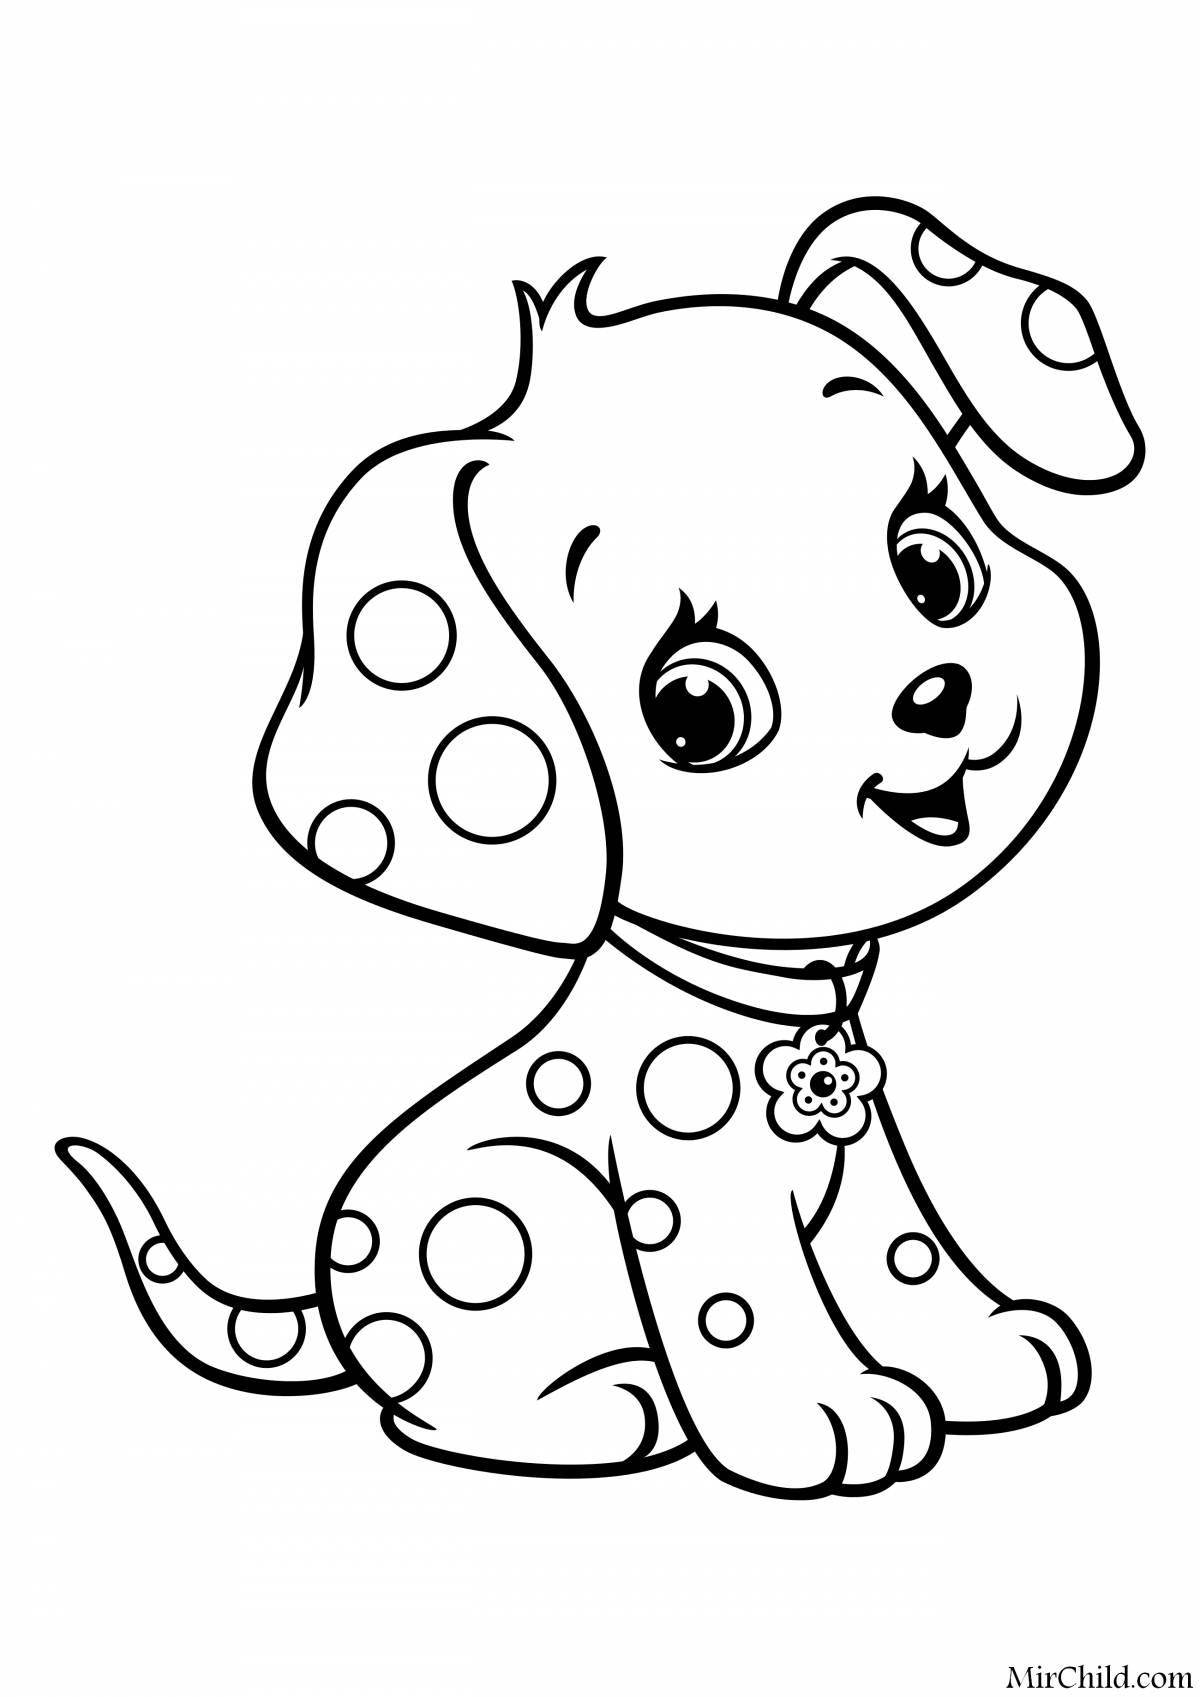 Humorous dog coloring book for children 4-5 years old